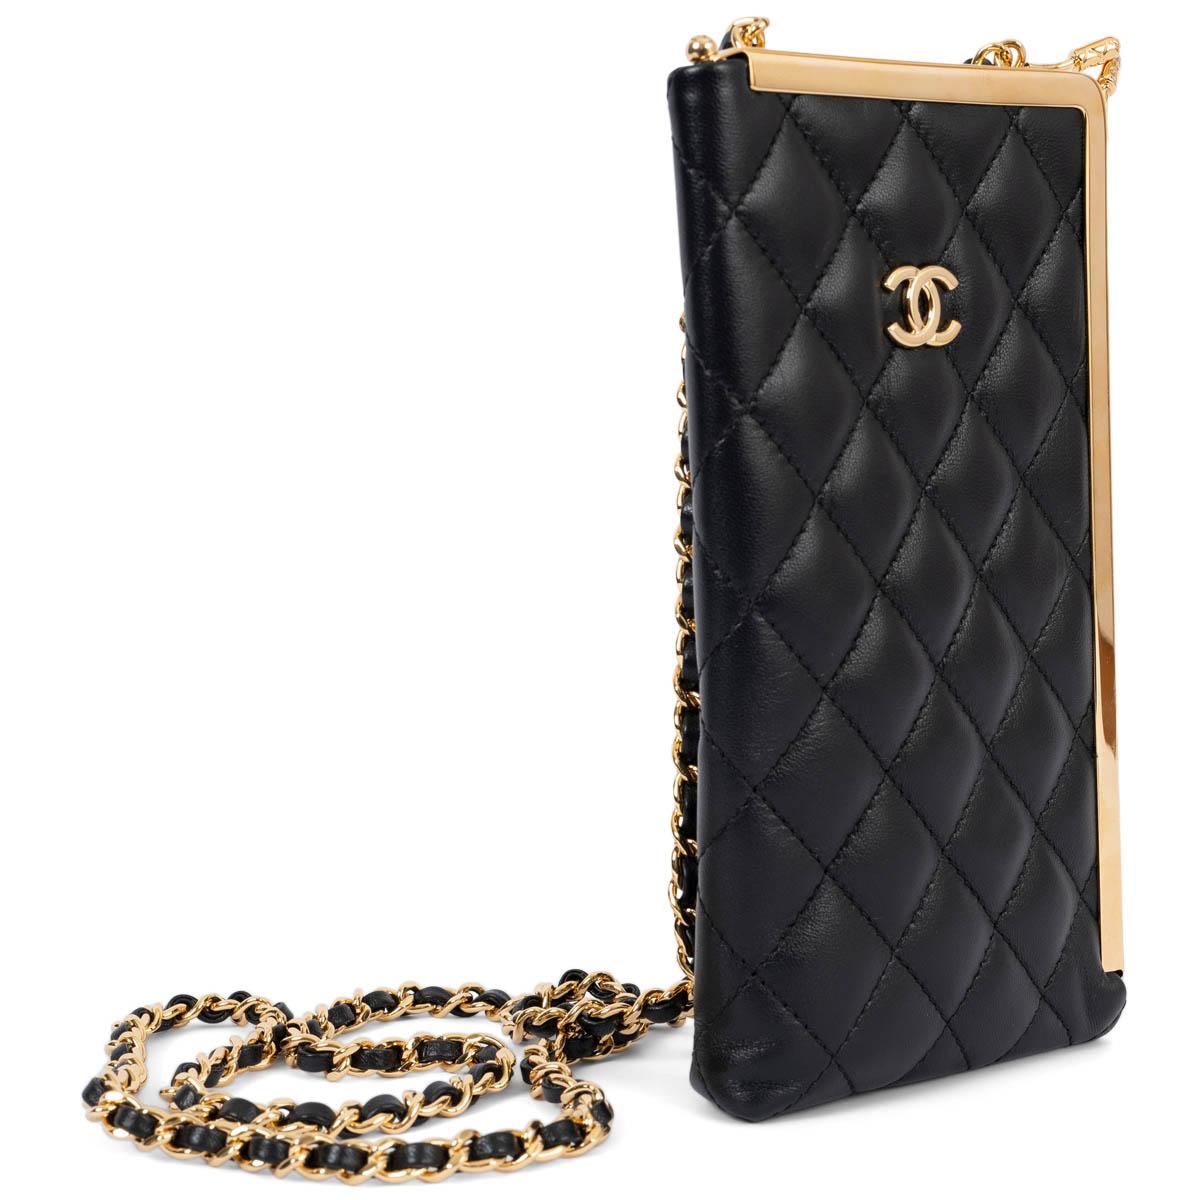 100% authentic Chanel kisslock frame clutch on chain in black lambskin leather featuring gold-tone metal hardware. Lined in black leather with one credit card slot. Has been carried once or twice and shows faint pressmarks from the chain on the